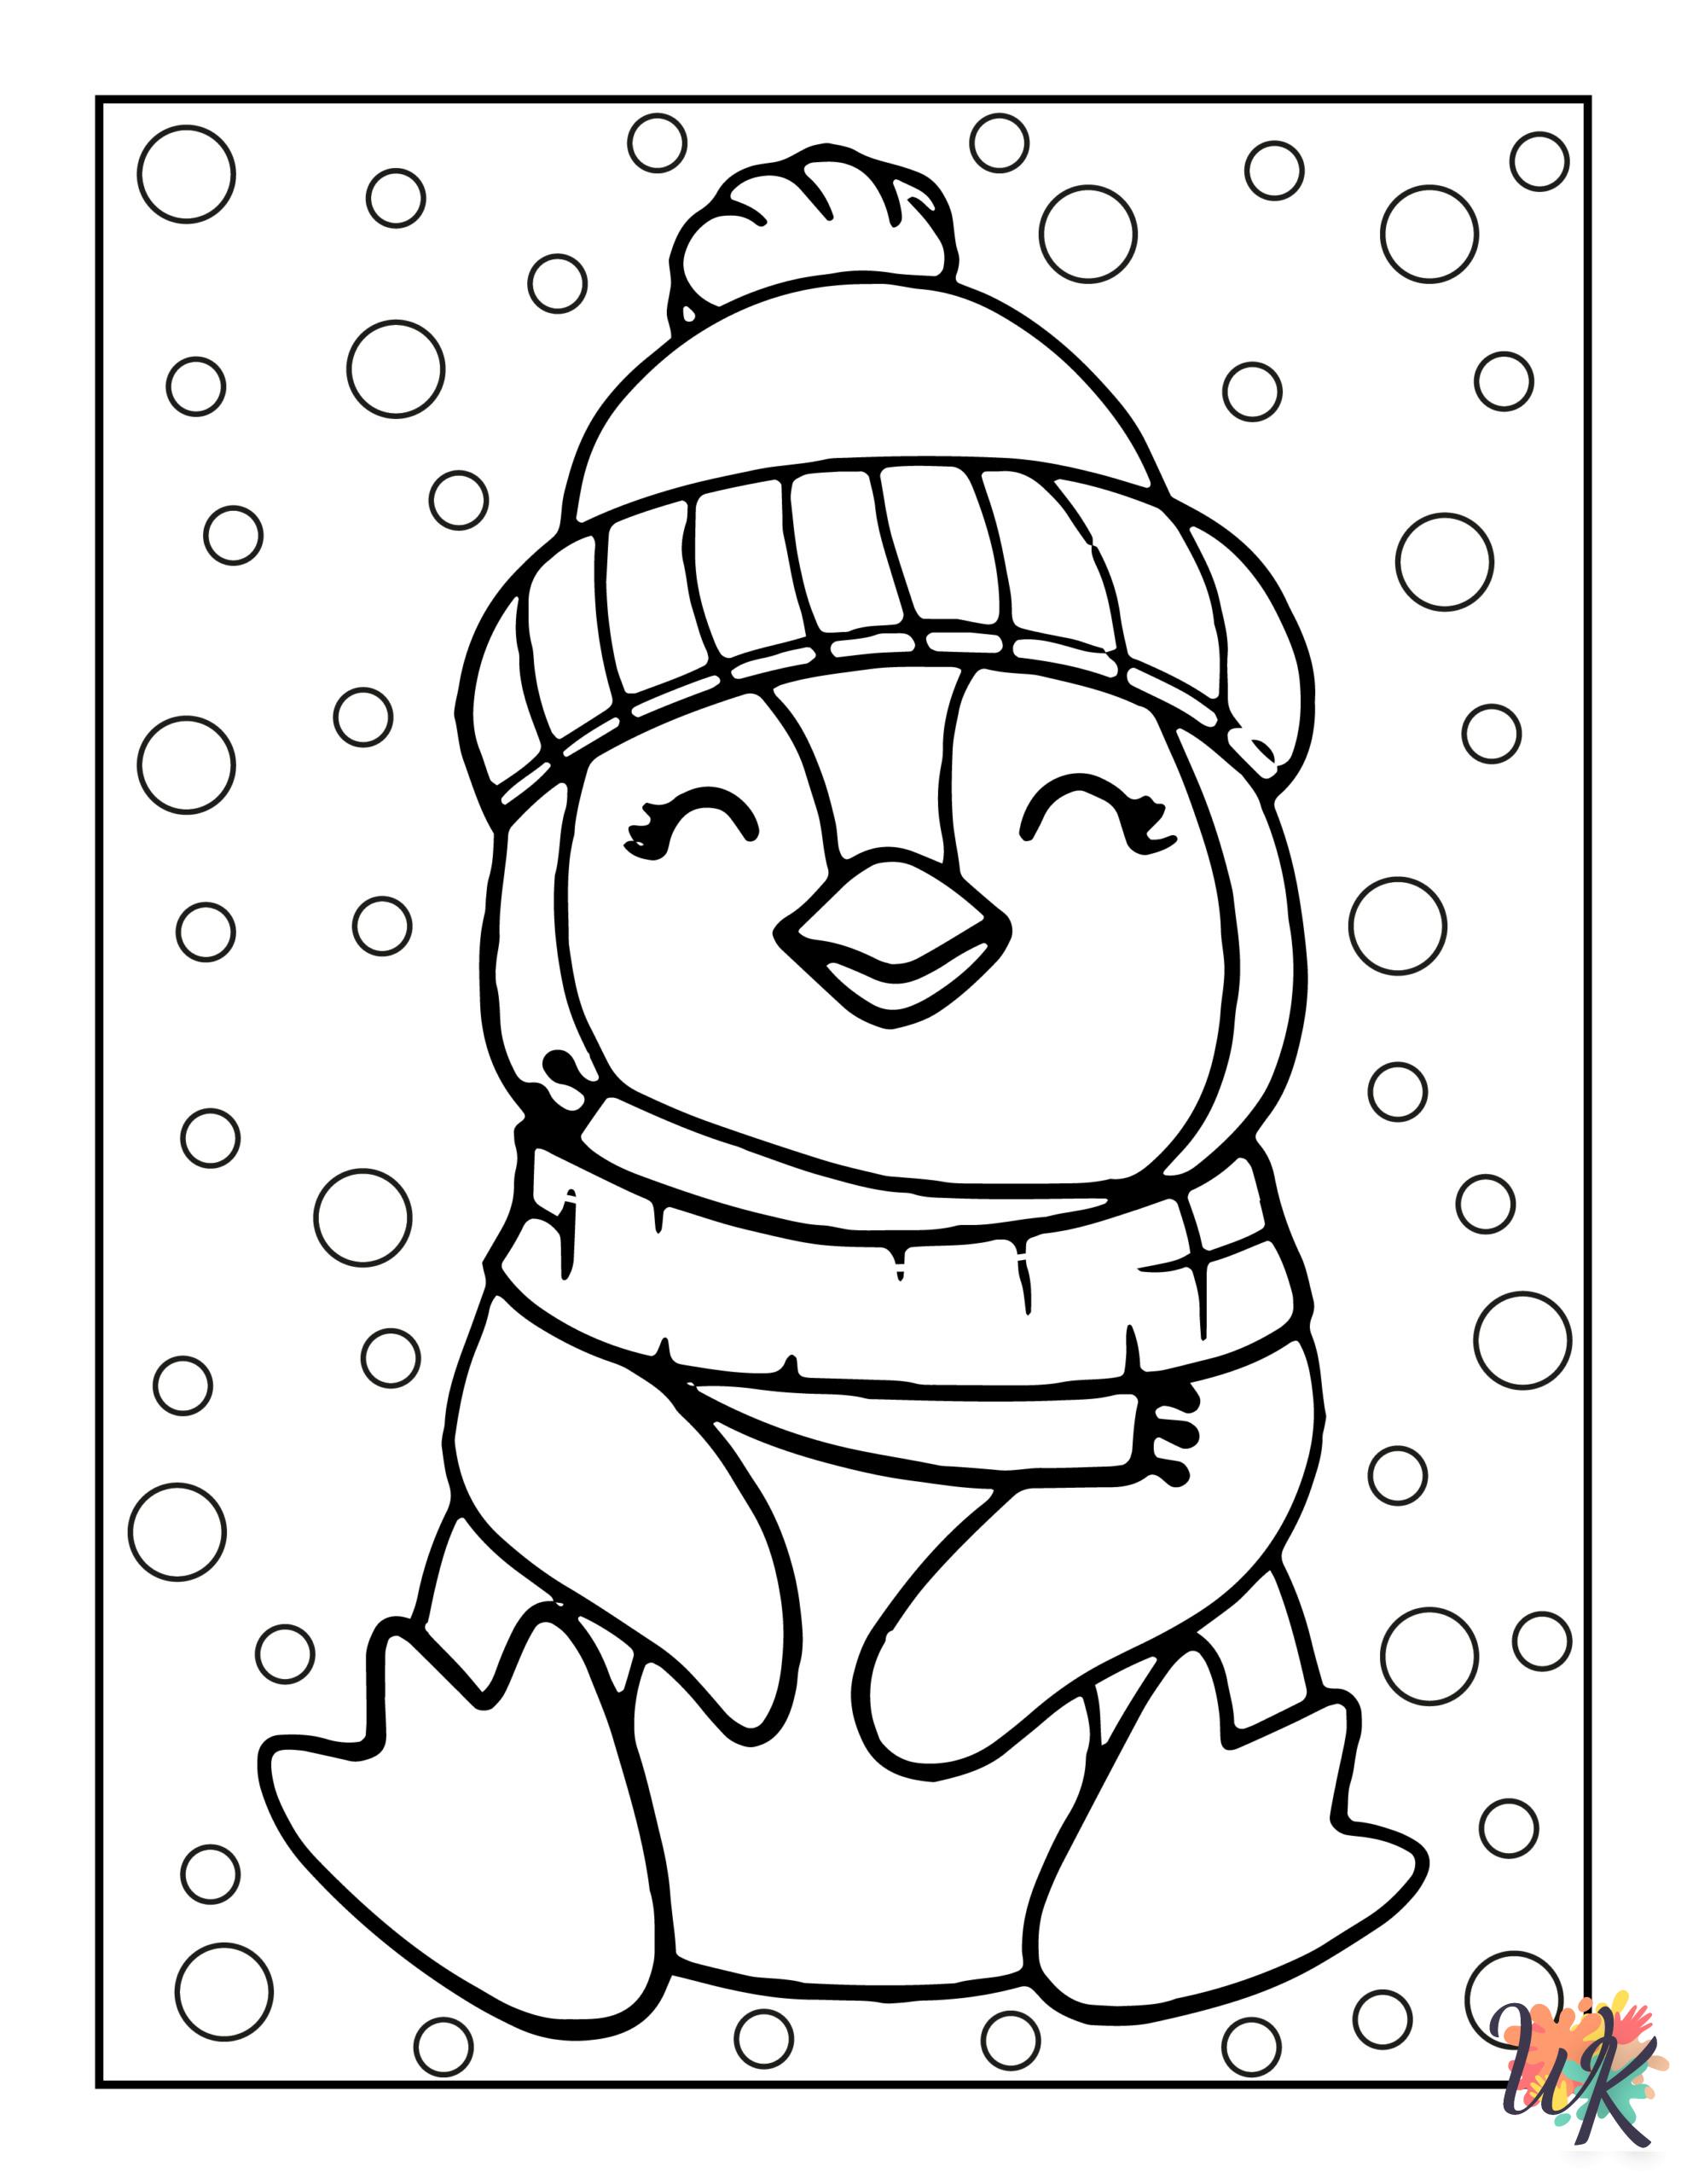 detailed Penguin coloring pages for adults